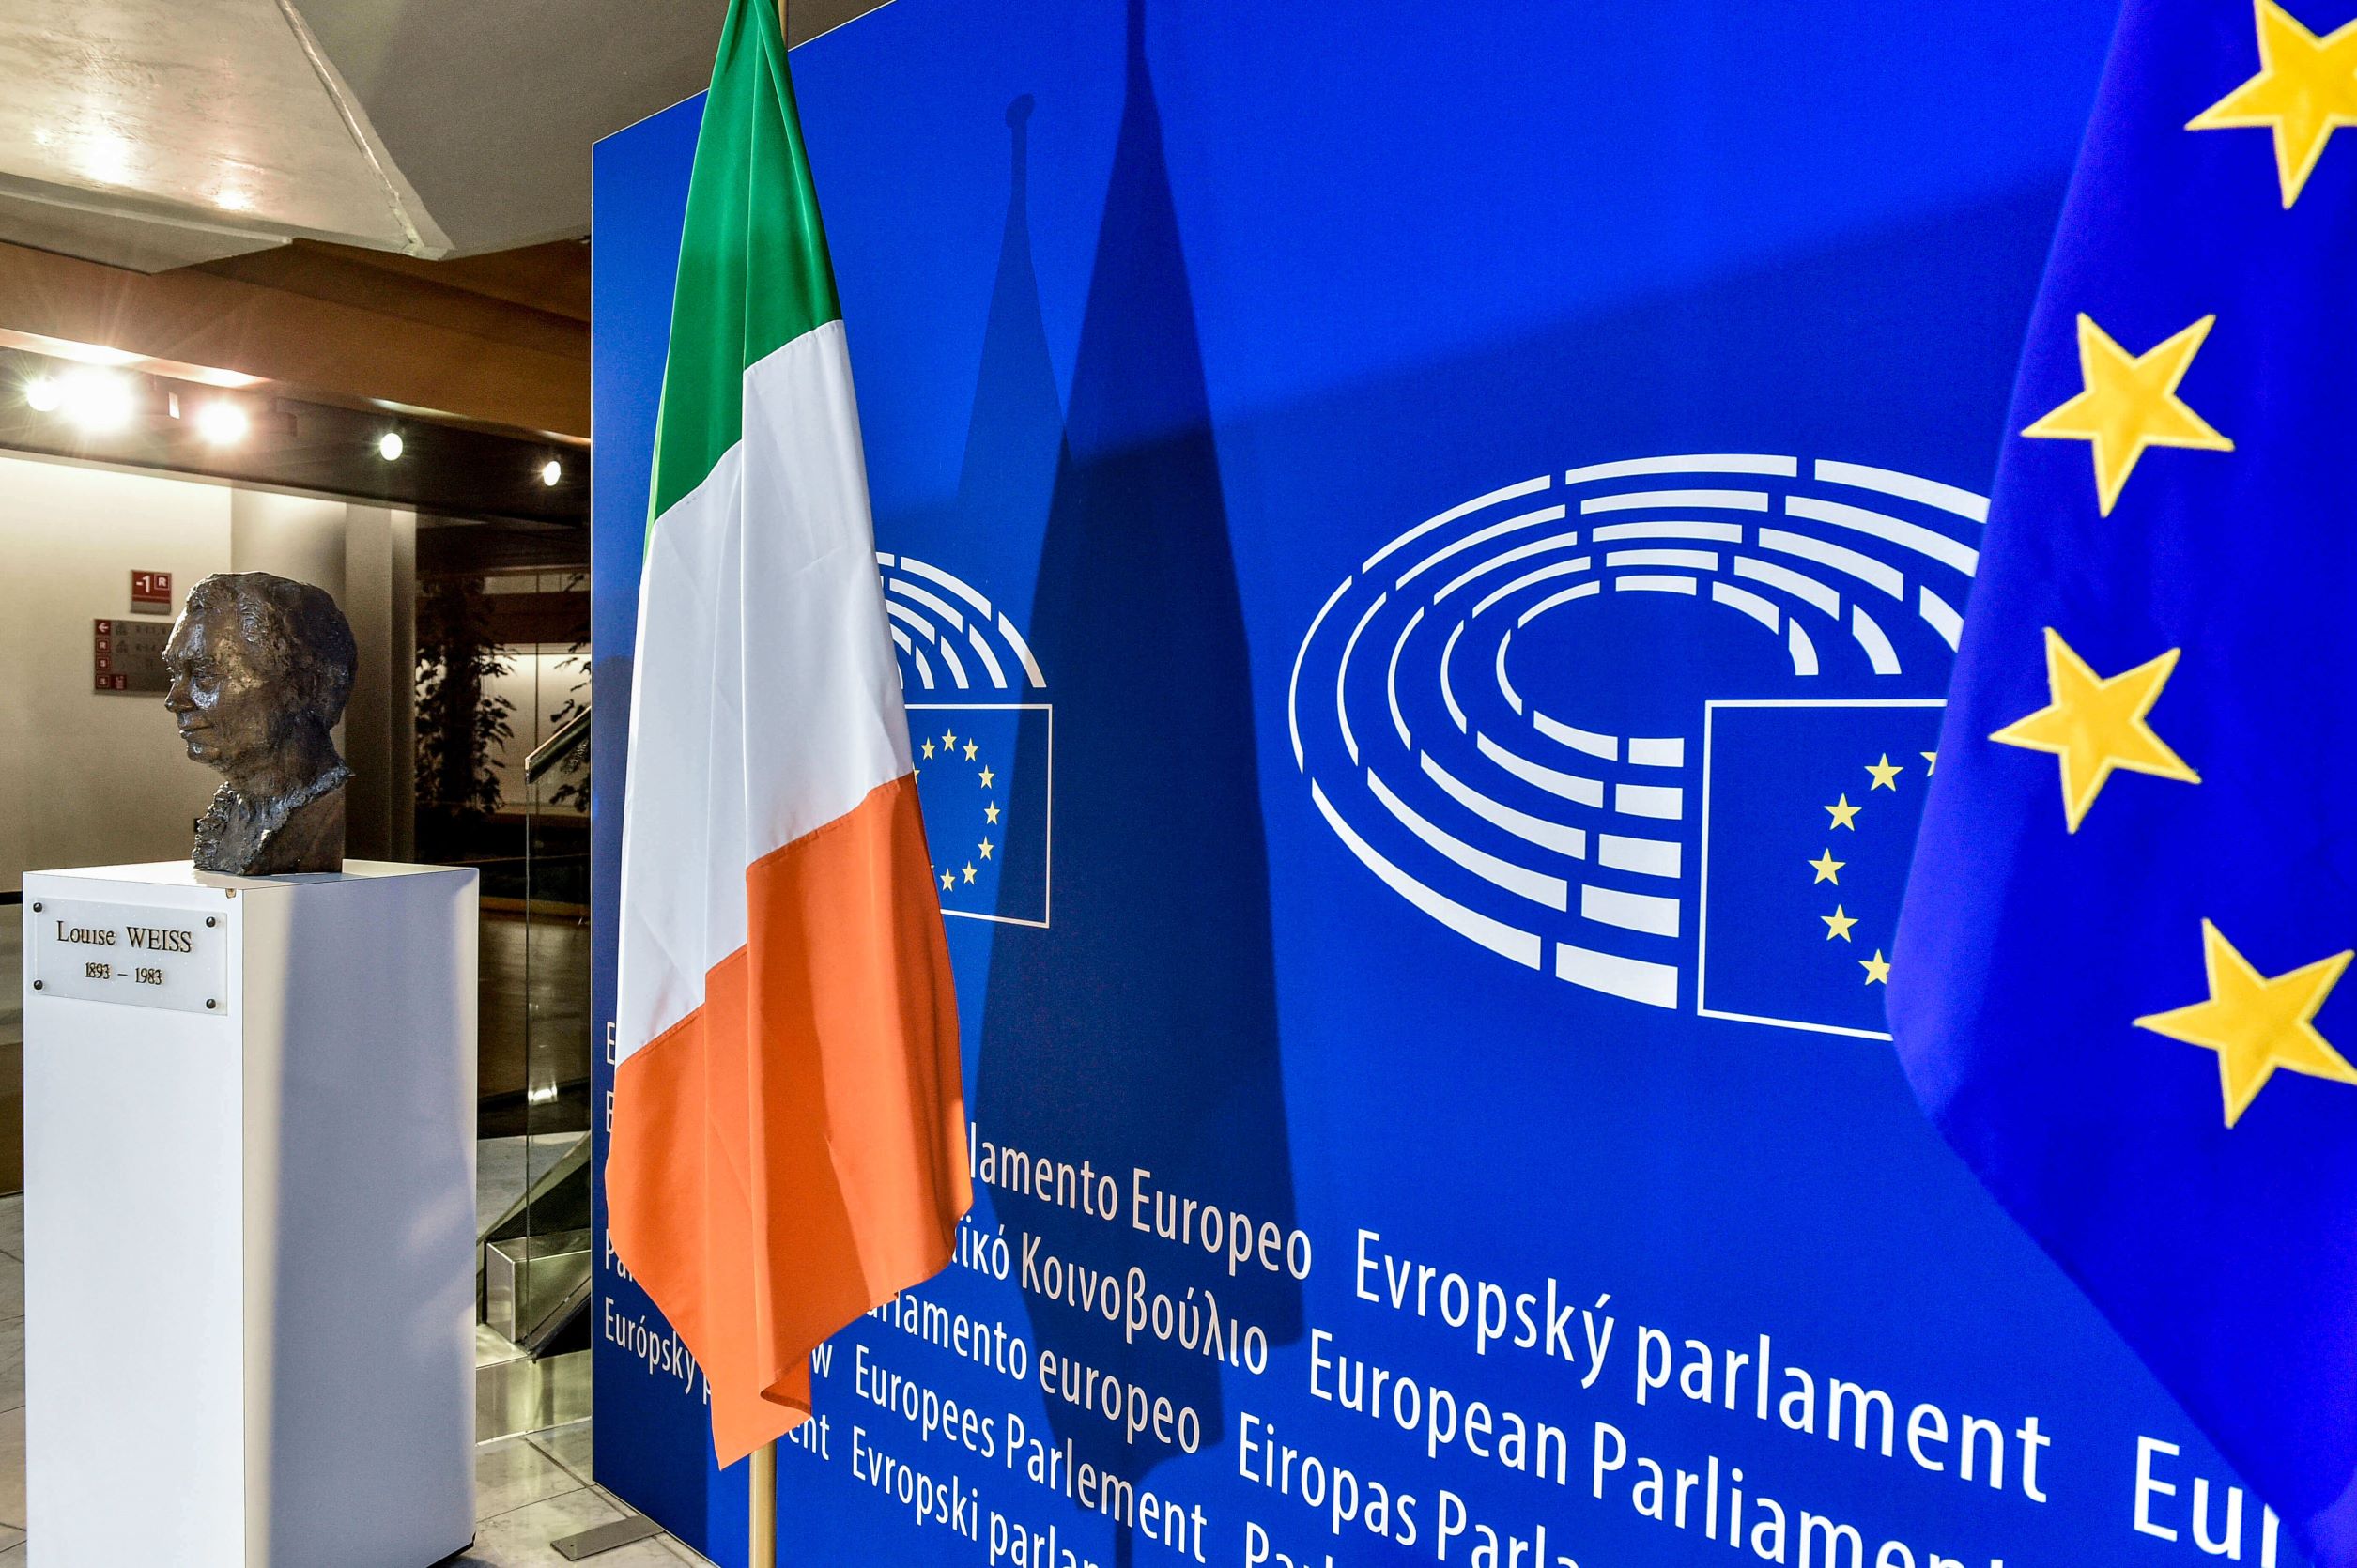 An Irish flag is placed in front of a stand-up exibition graphic related to the European Union